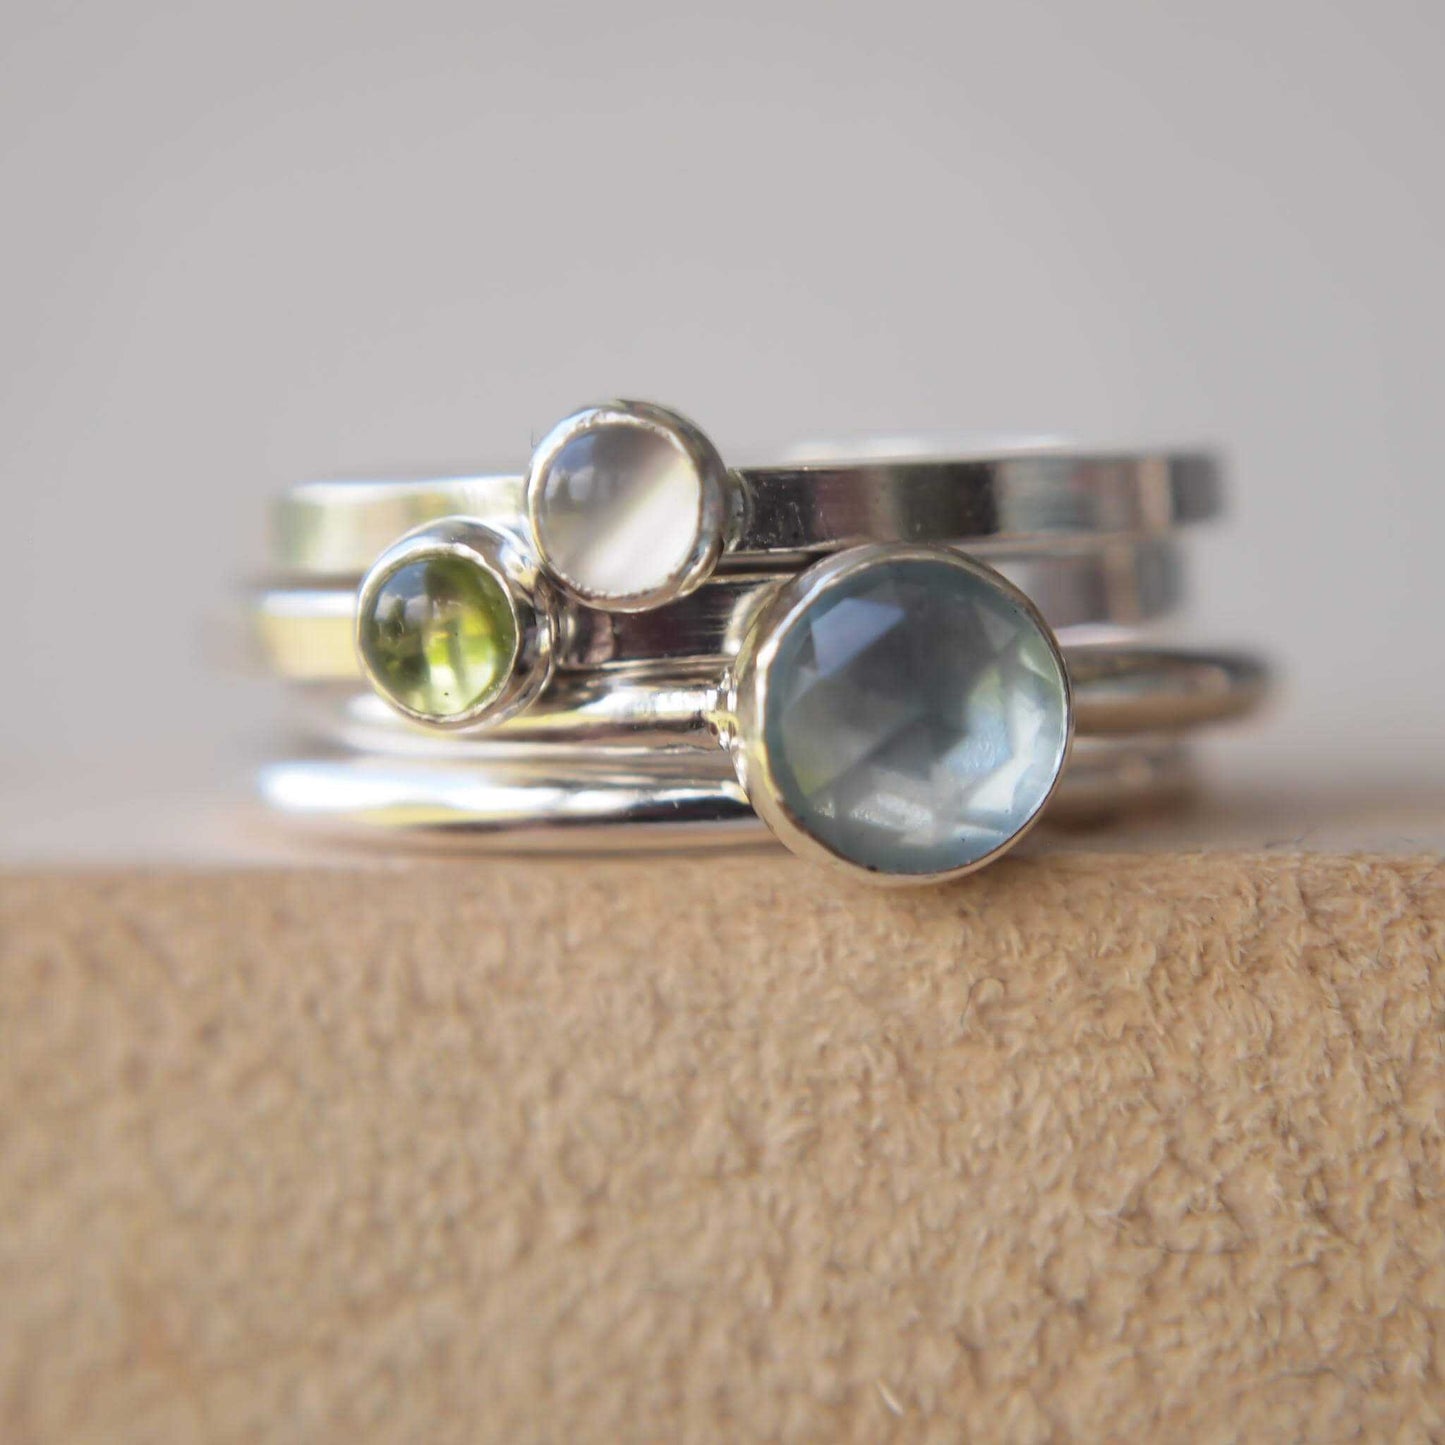 Stacking ring set with aquamarine, moonstone, and peridot. all in different sized round stones. The  gemstones colours are aqua, moss green and milky white on silver. Handmade in Scotland by maram jewellery